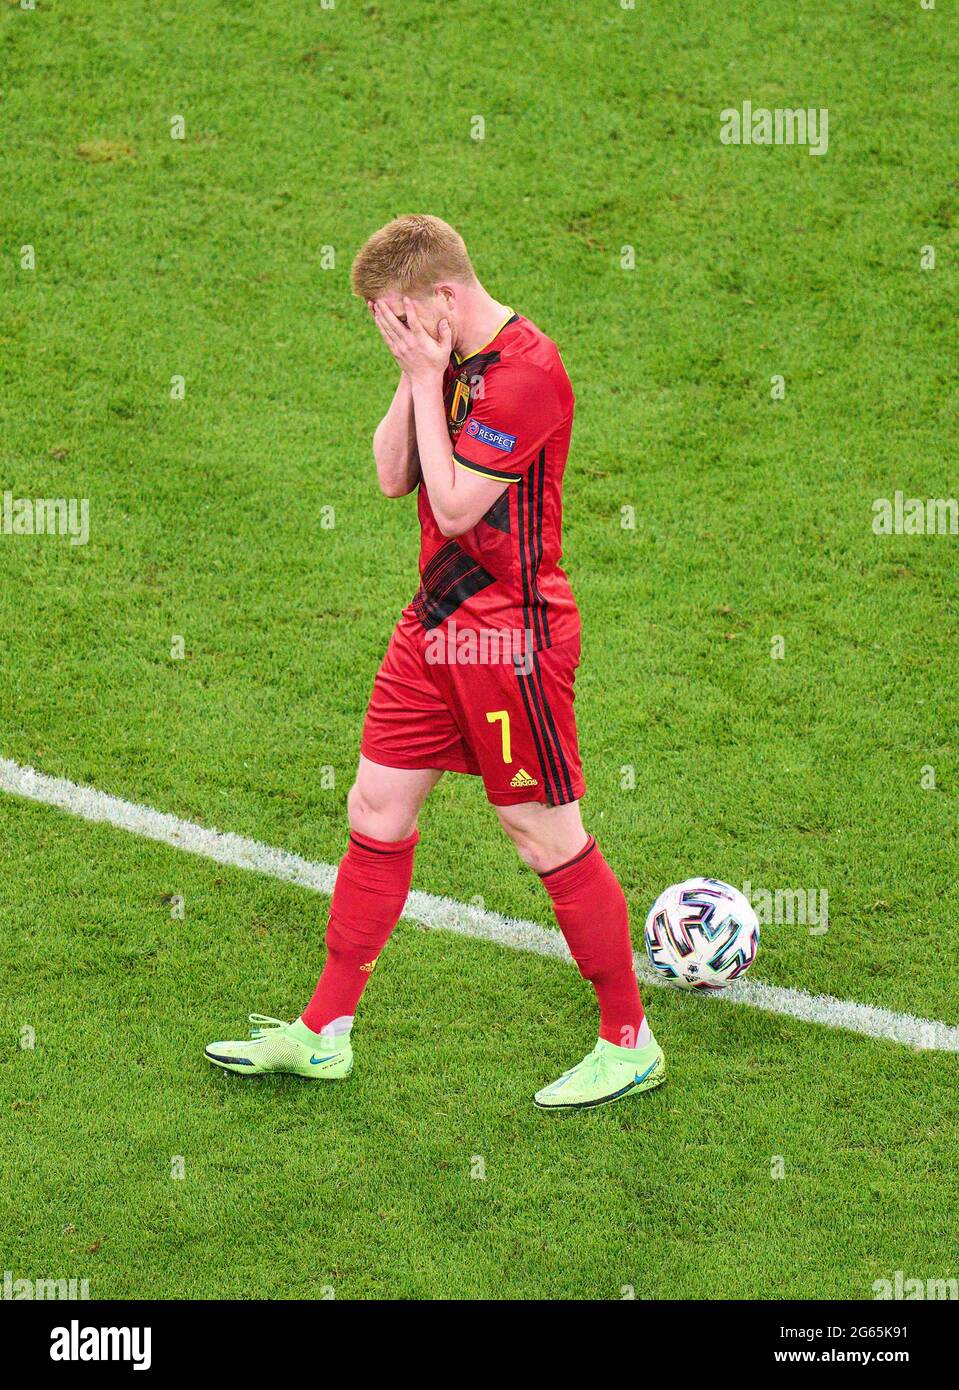 Kevin DE BRUYNE, Belgium Nr.7 sad  in the quarterfinal match BELGIUM - ITALY  at the football UEFA European Championships 2020 in Season 2020/2021 on July 02, 2021  in Munich, Germany. © Peter Schatz / Alamy Live News Stock Photo